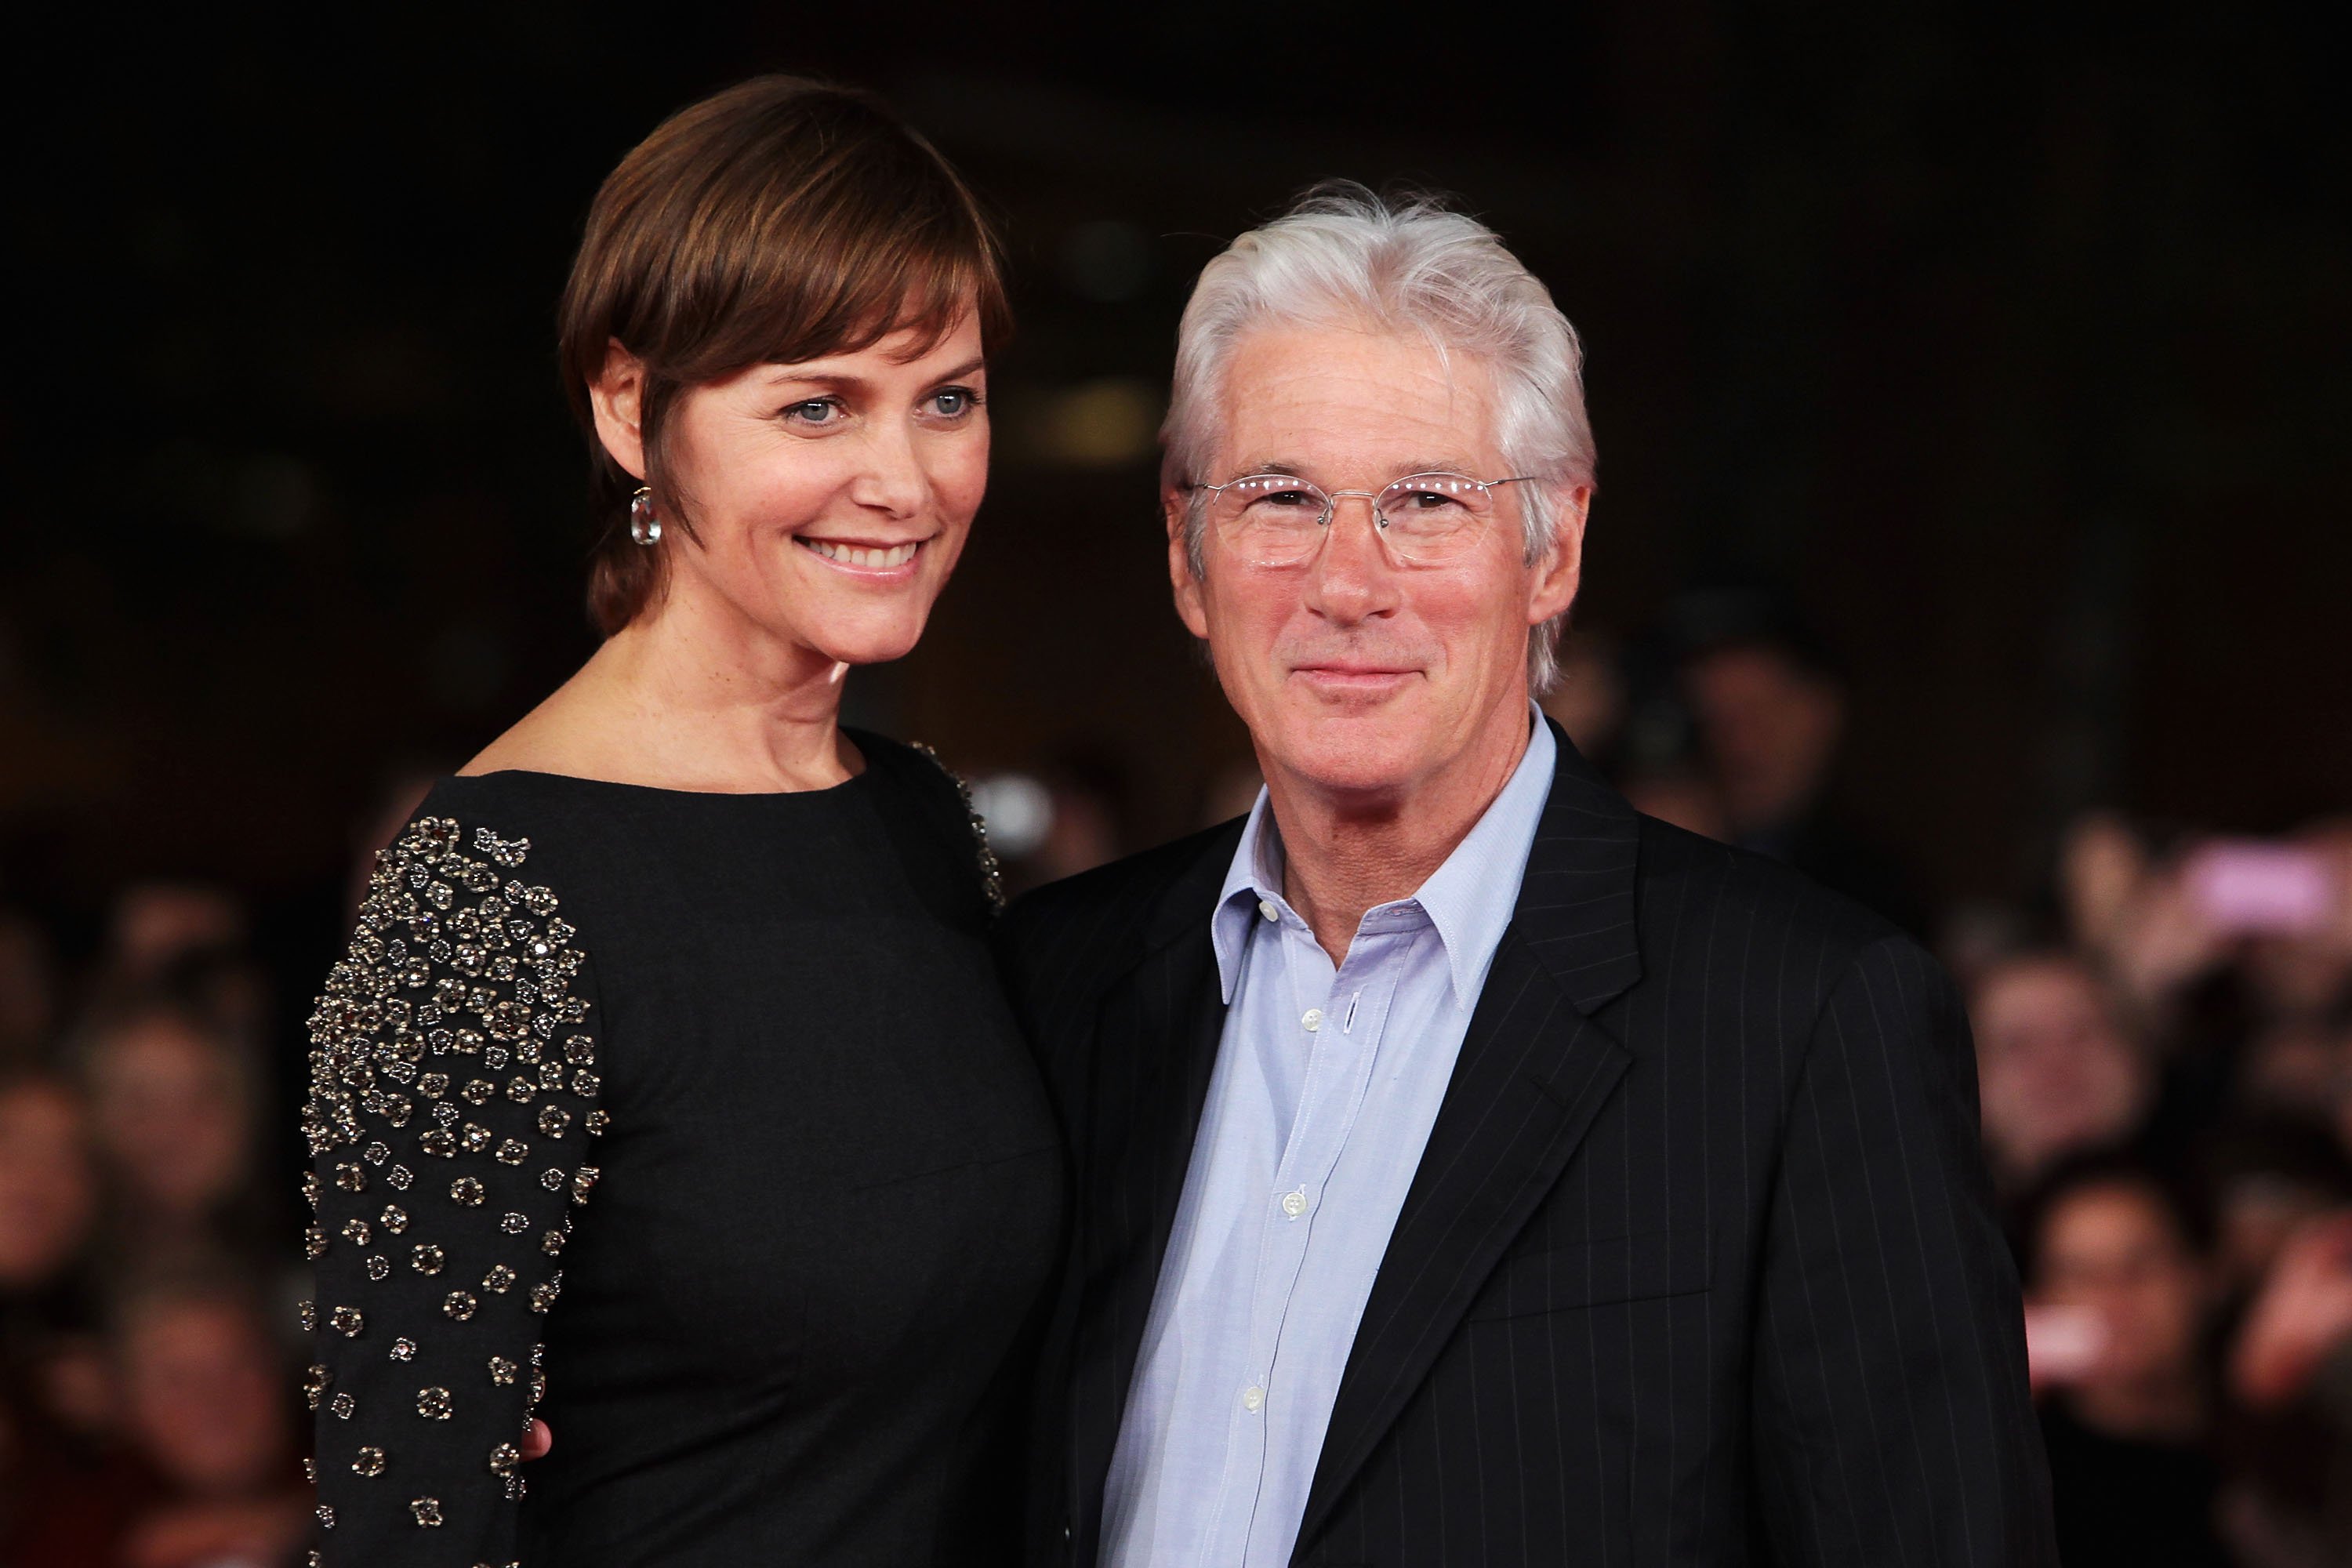 Carey Lowell and Richard Gere at the 6th International Rome Film Festival on November 3, 2011 | Source: Getty Images